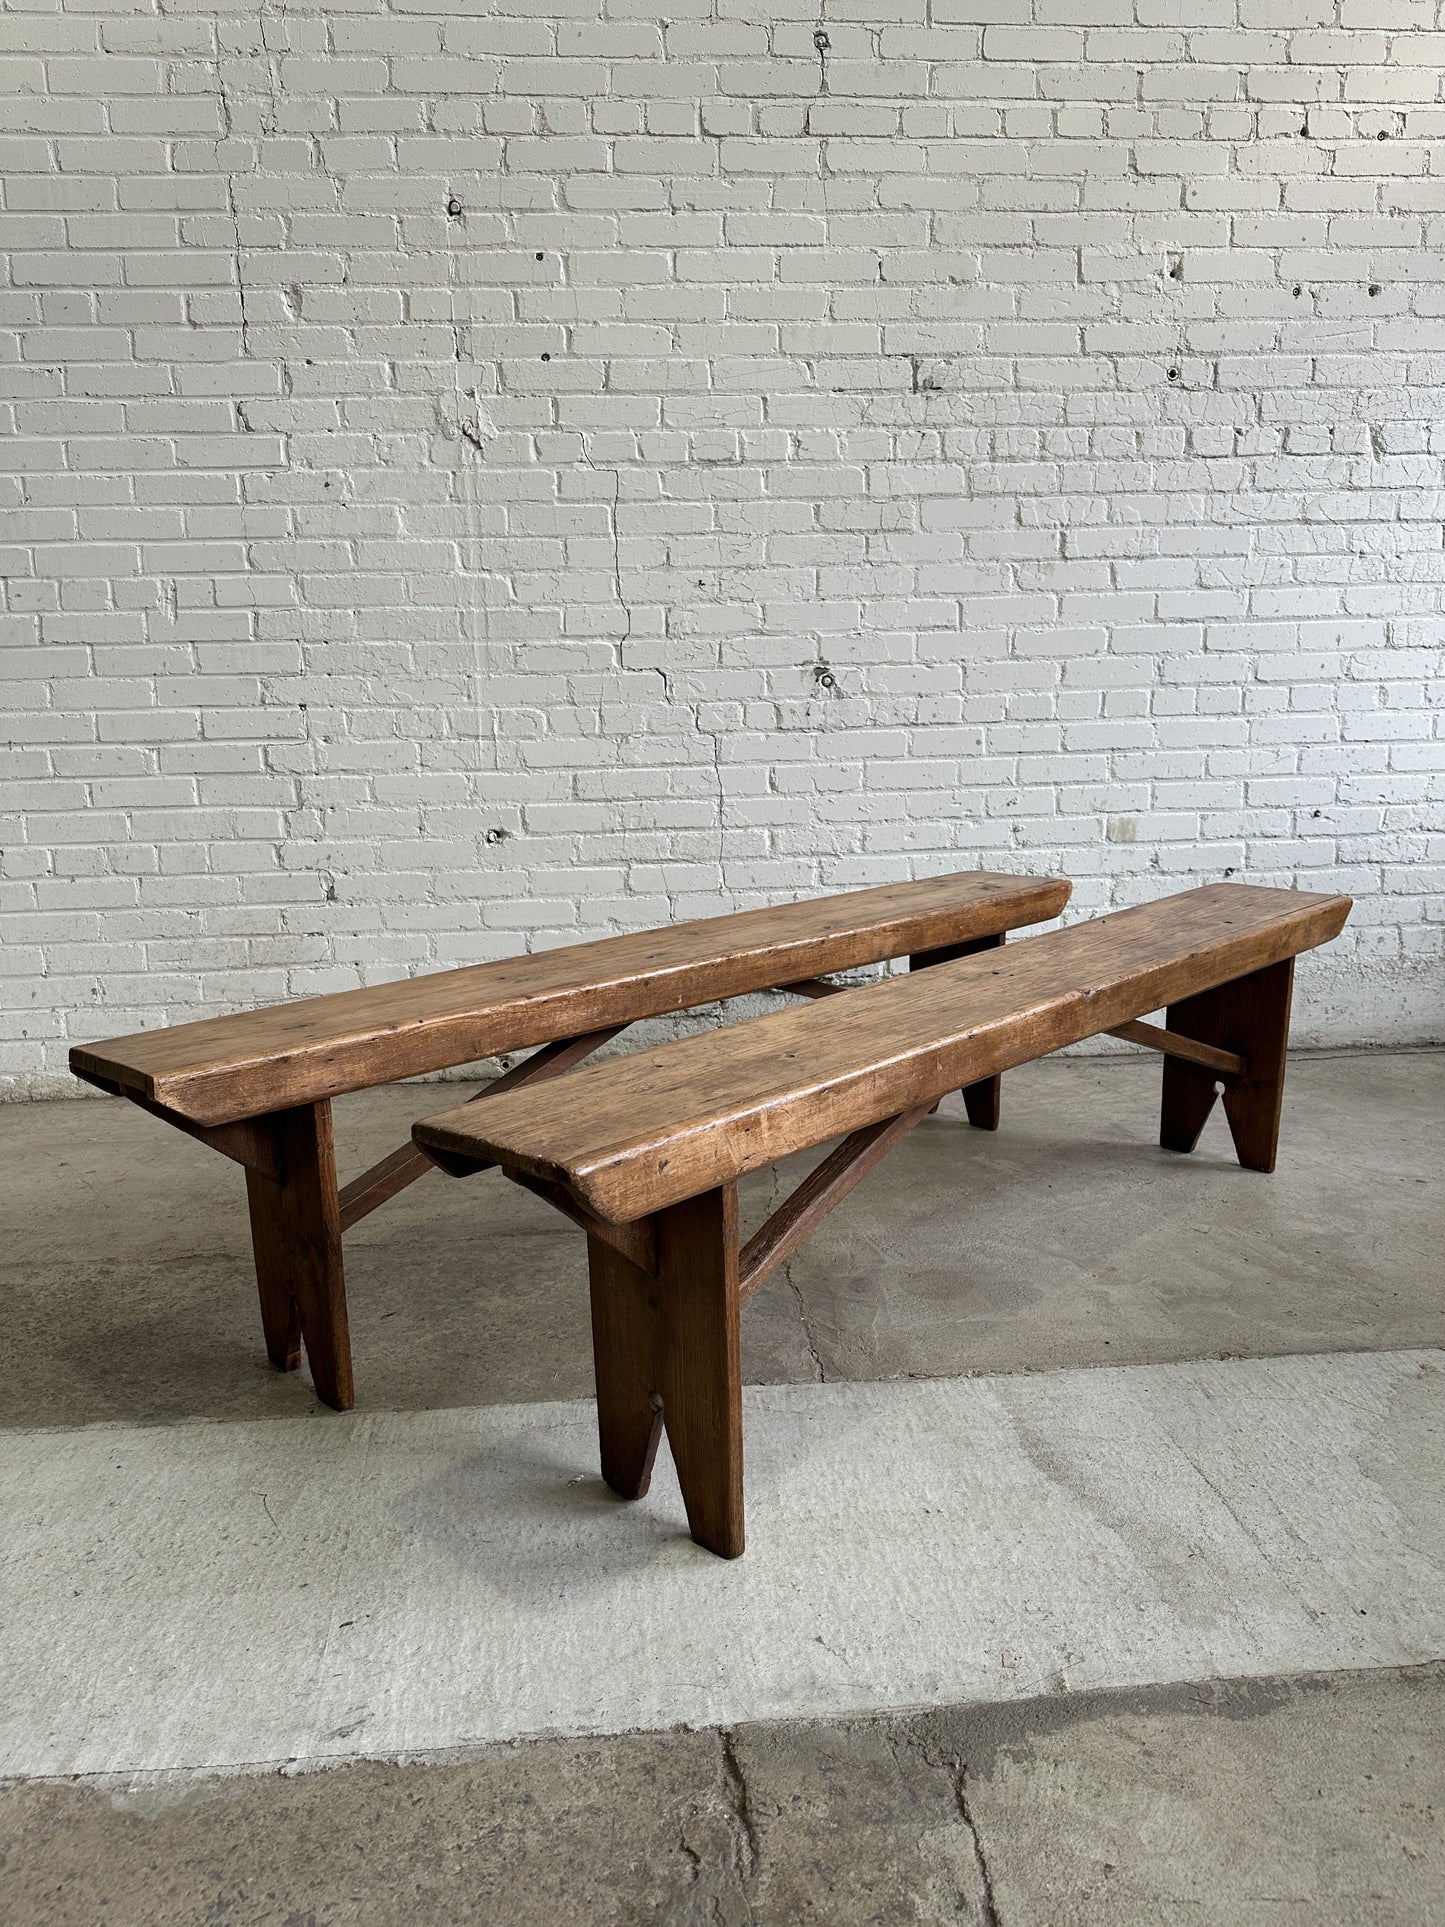 A Pair of 6-Foot English Antique Pine Benches c. 1875